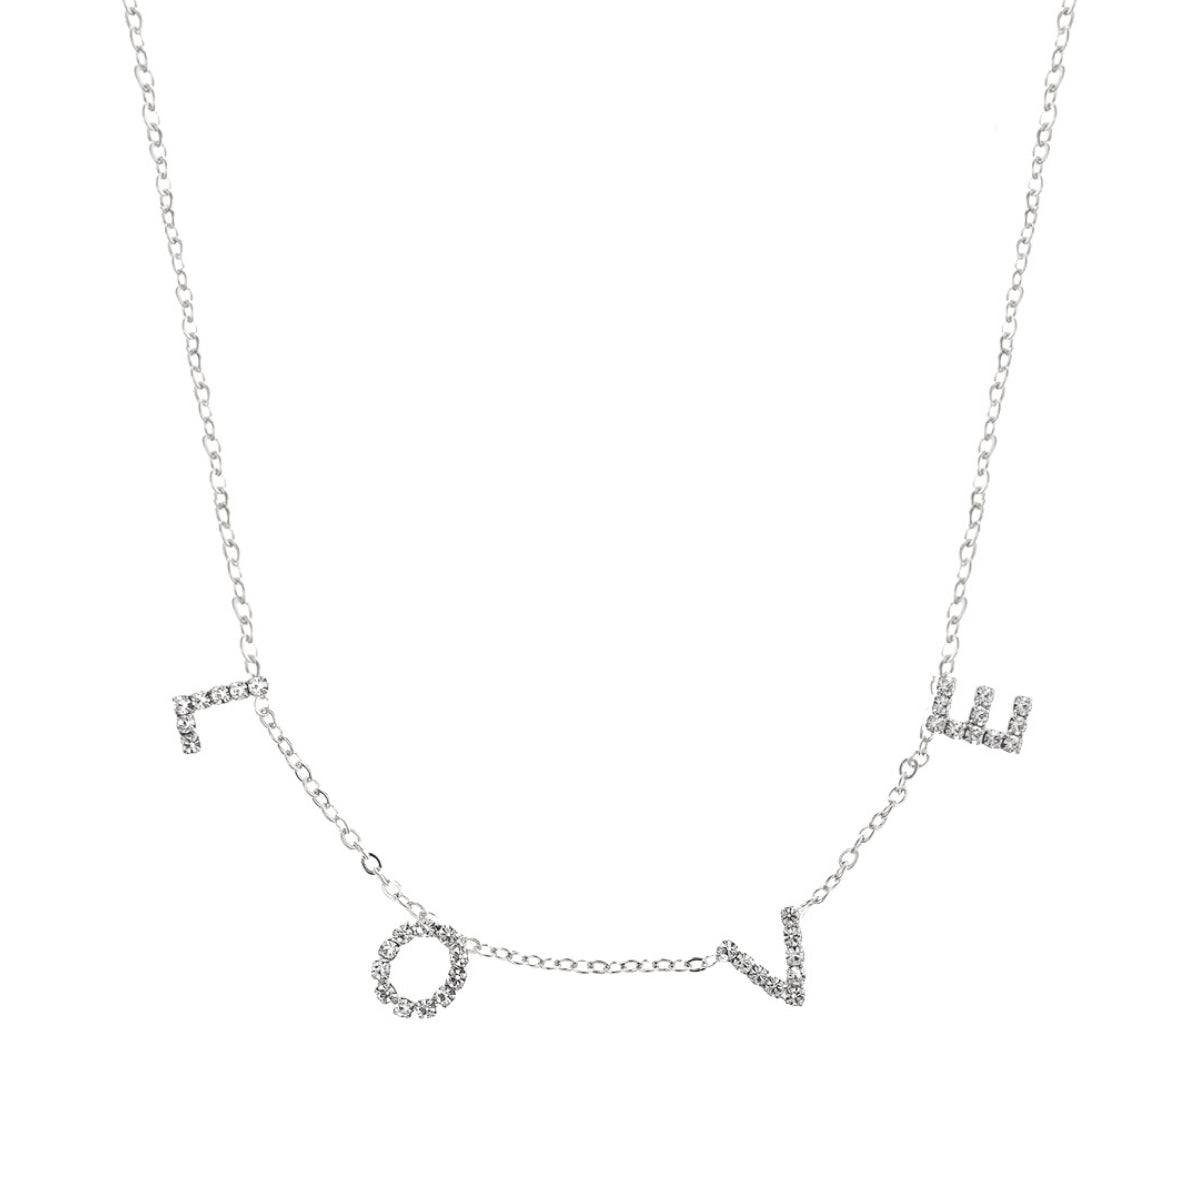 Silver LOVE Station Necklace